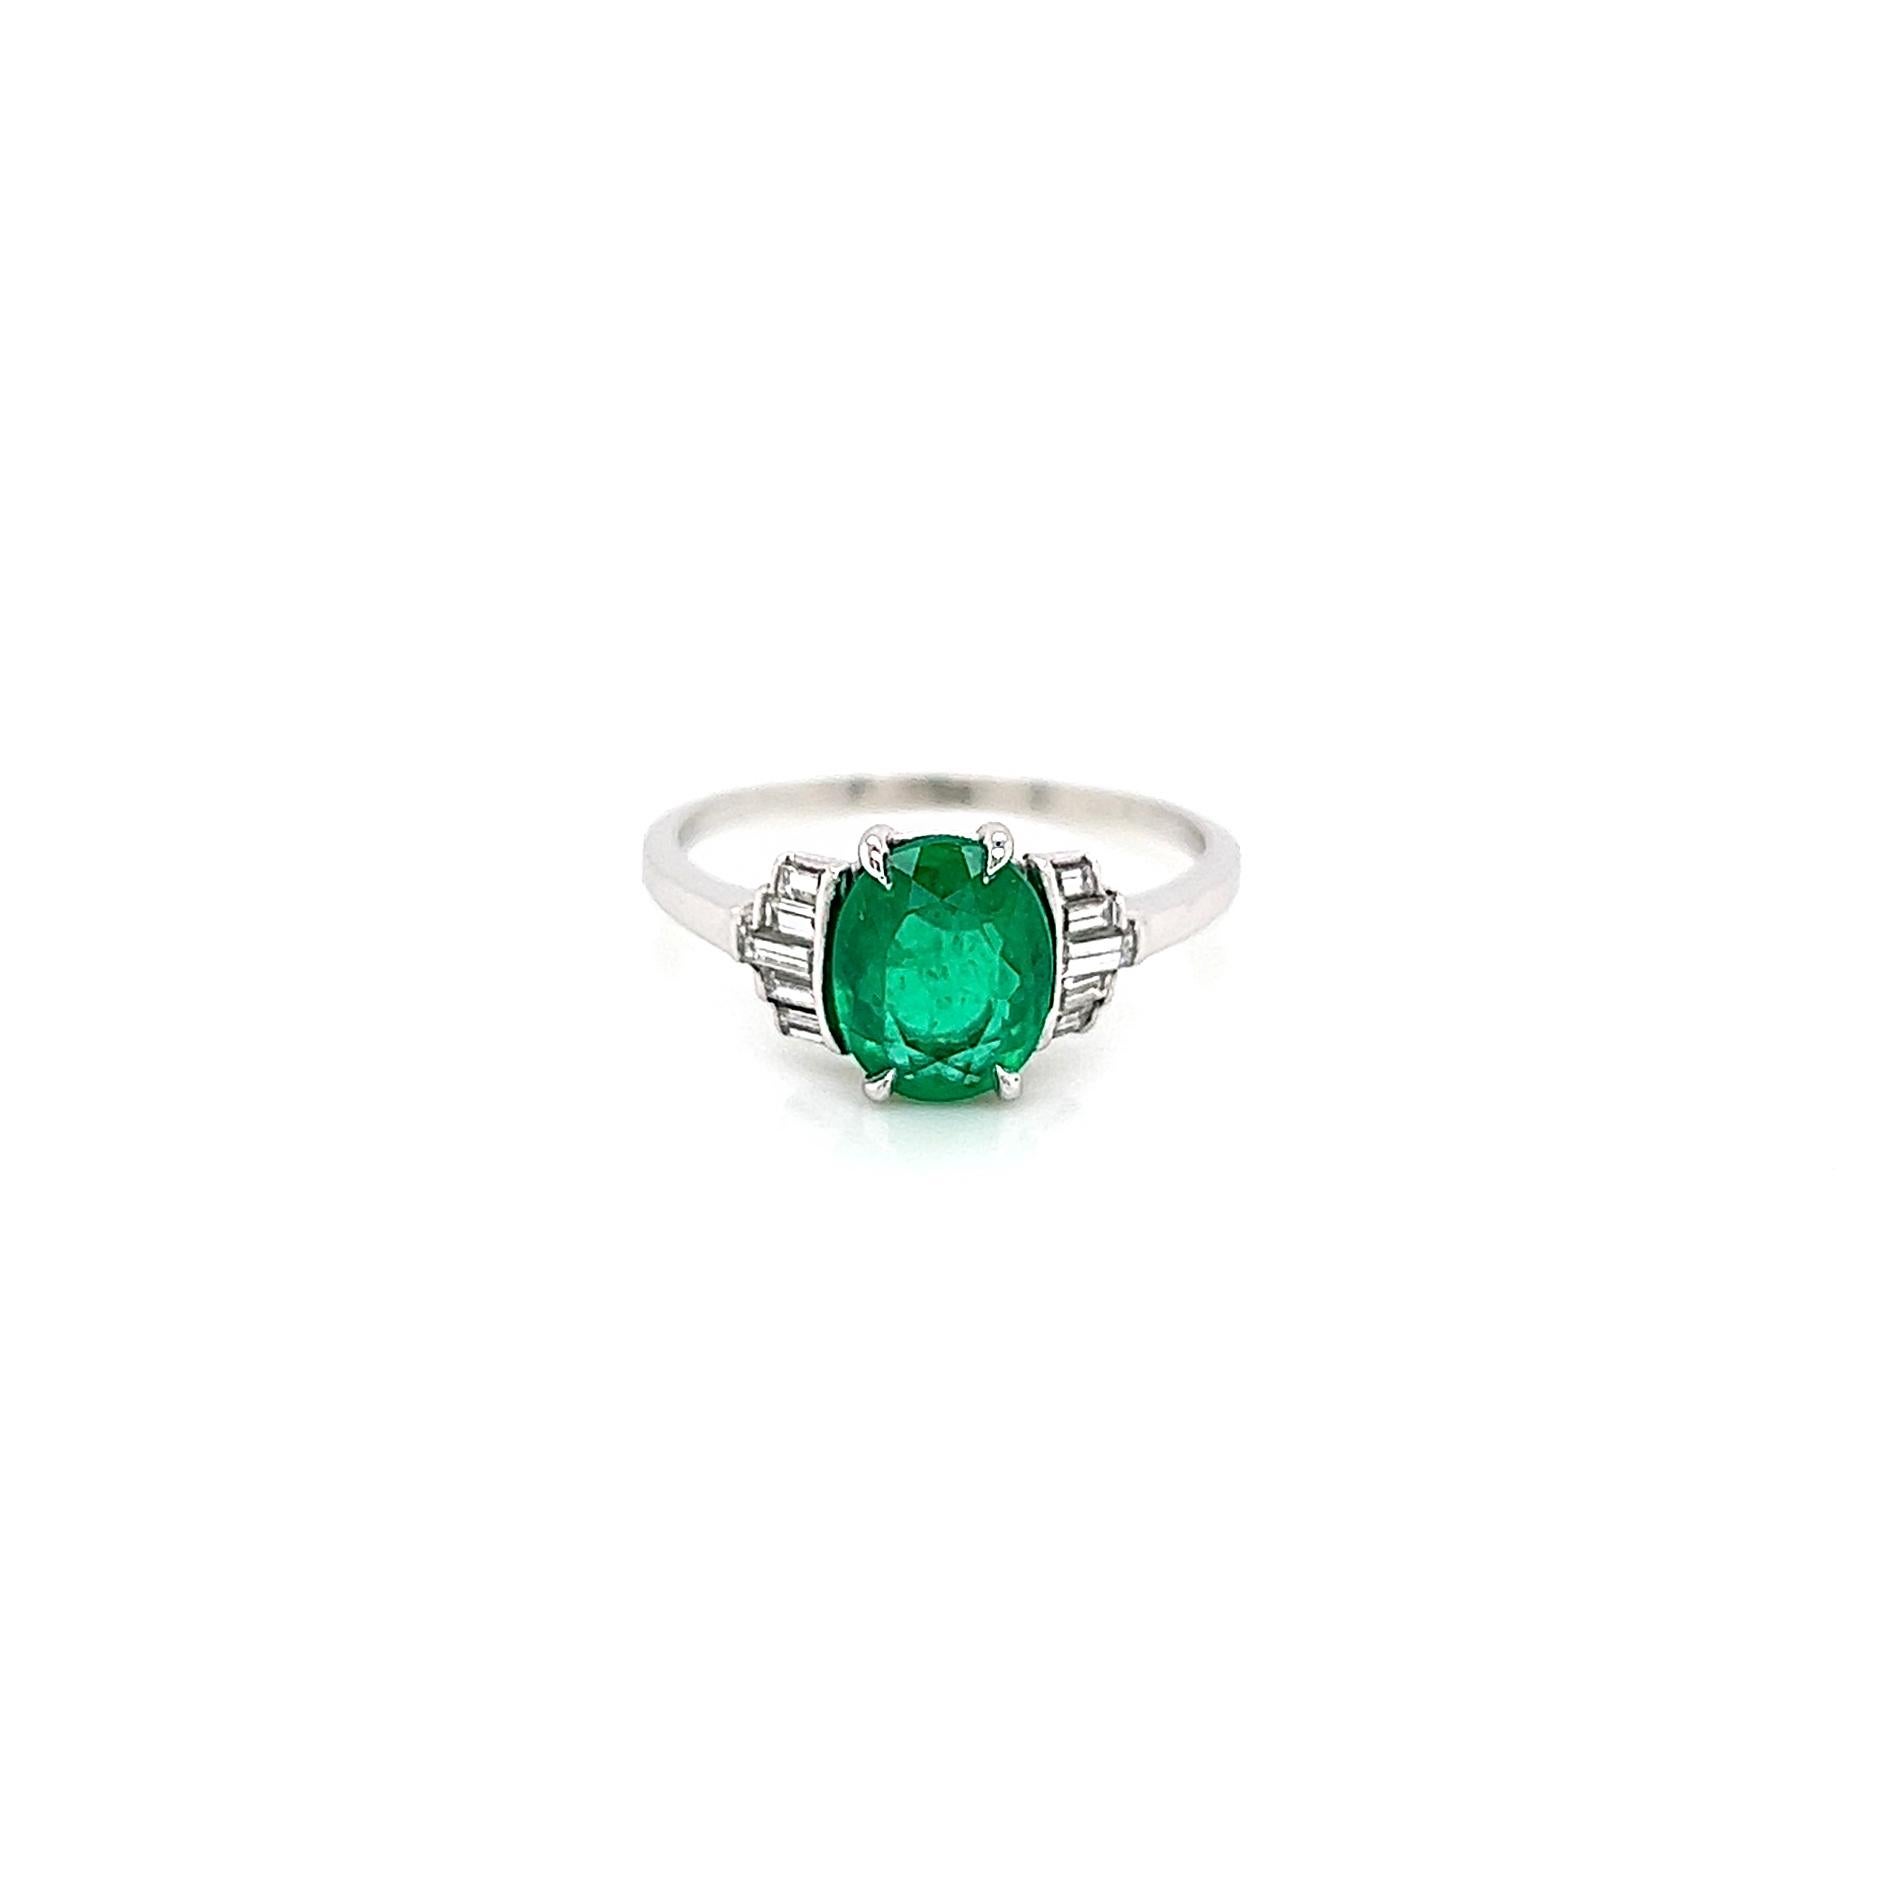 1.58 Total Carat Natural Columbian Green Emerald and Diamond Ladies Vintage Ring

-Metal Type: Platinum
-Oval Columbian Green Emerald
-Baguette Natural Diamonds
-Size 7.0

Made in New York City